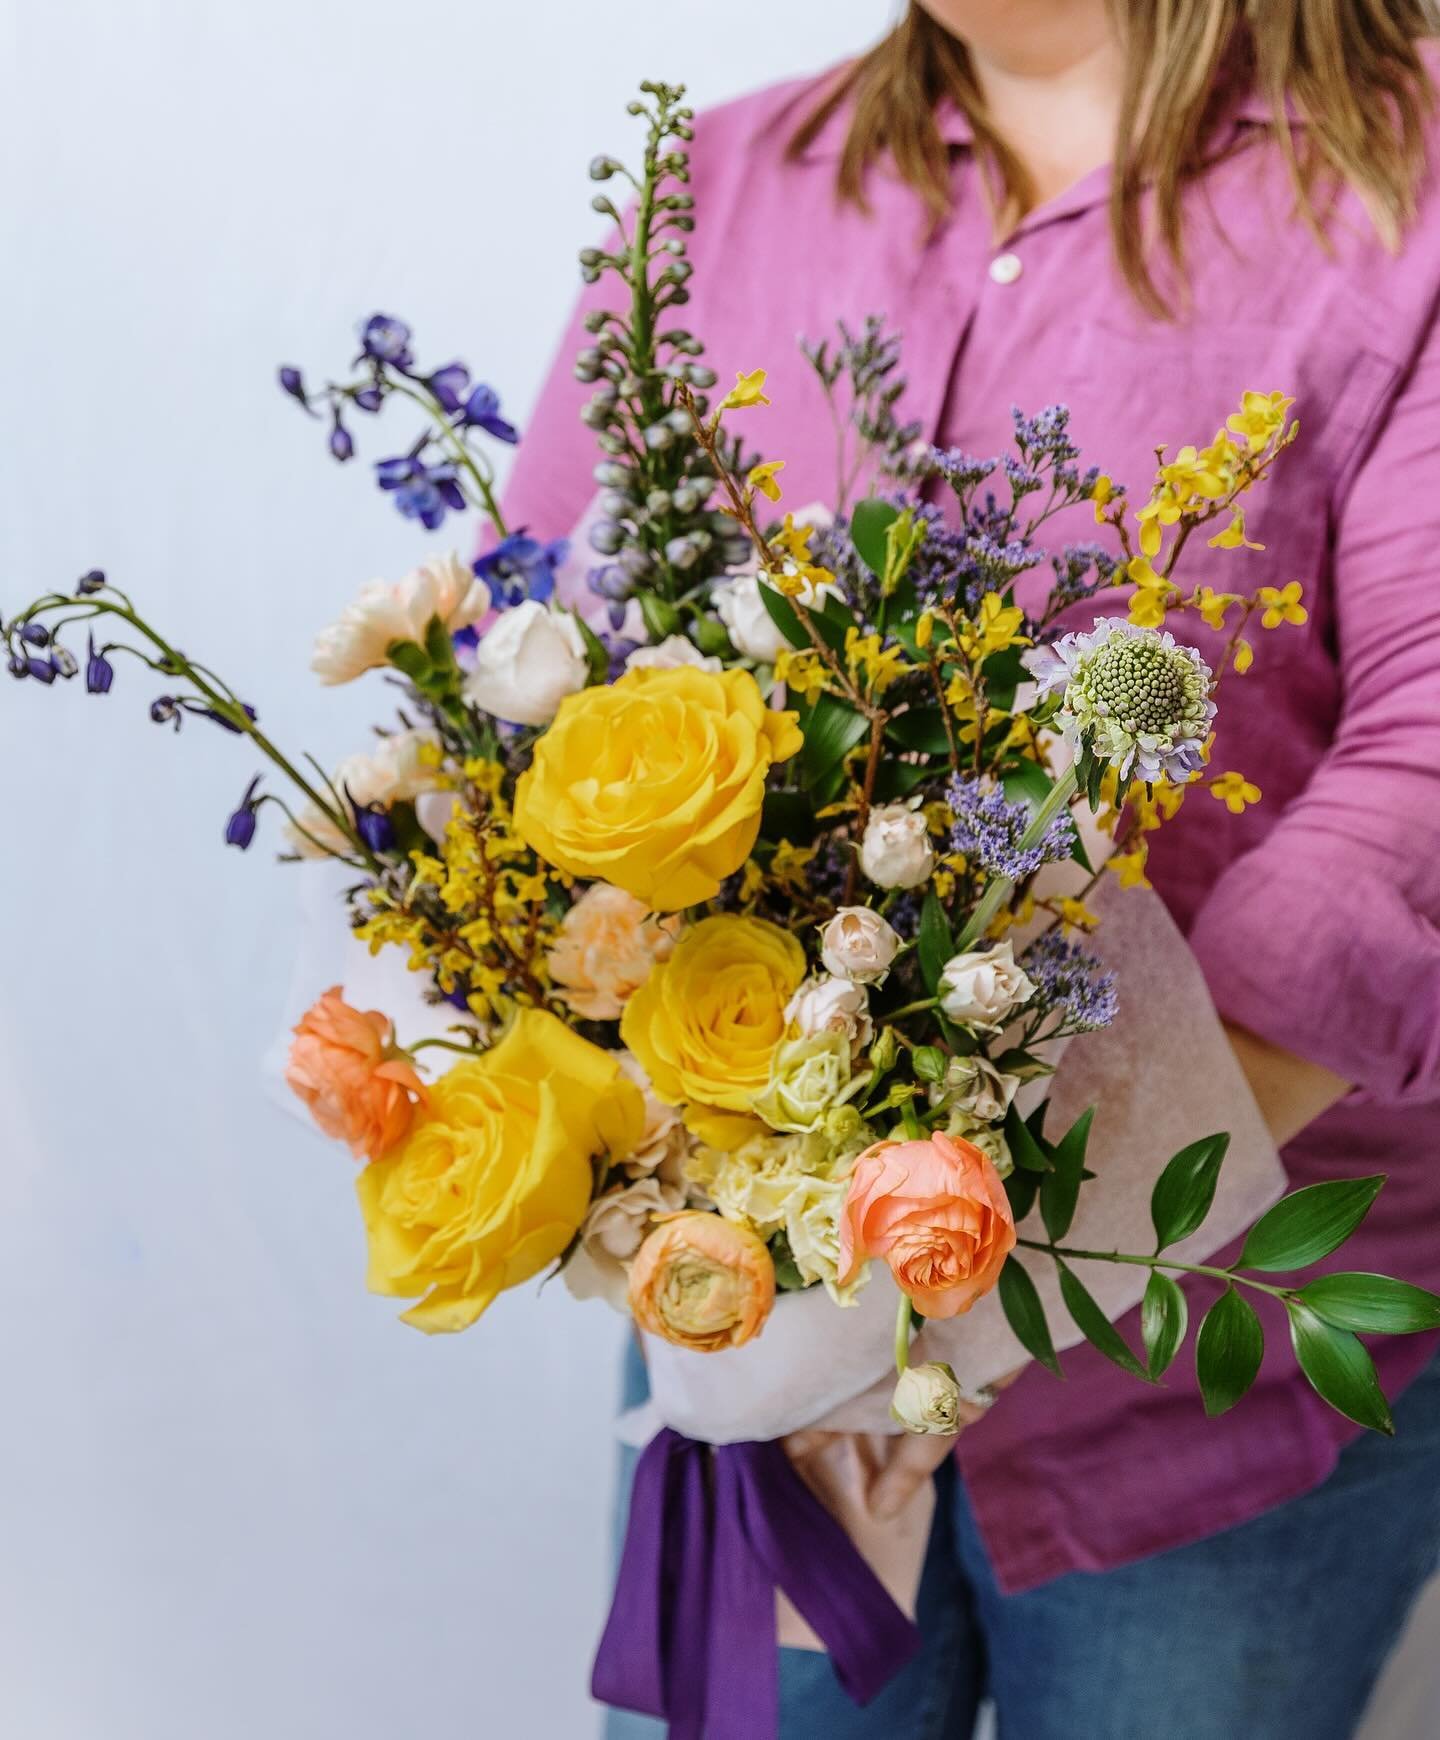 Moms, stepmoms, grandmas, expecting moms, mother figures, foster moms, mothers-in-laws, pet-moms
&mdash; to all moms! You are loved and deserve to be celebrated. 💛

Make sure to preorder Mother&rsquo;s Day flowers for whoever &ldquo;mom&rdquo; may b